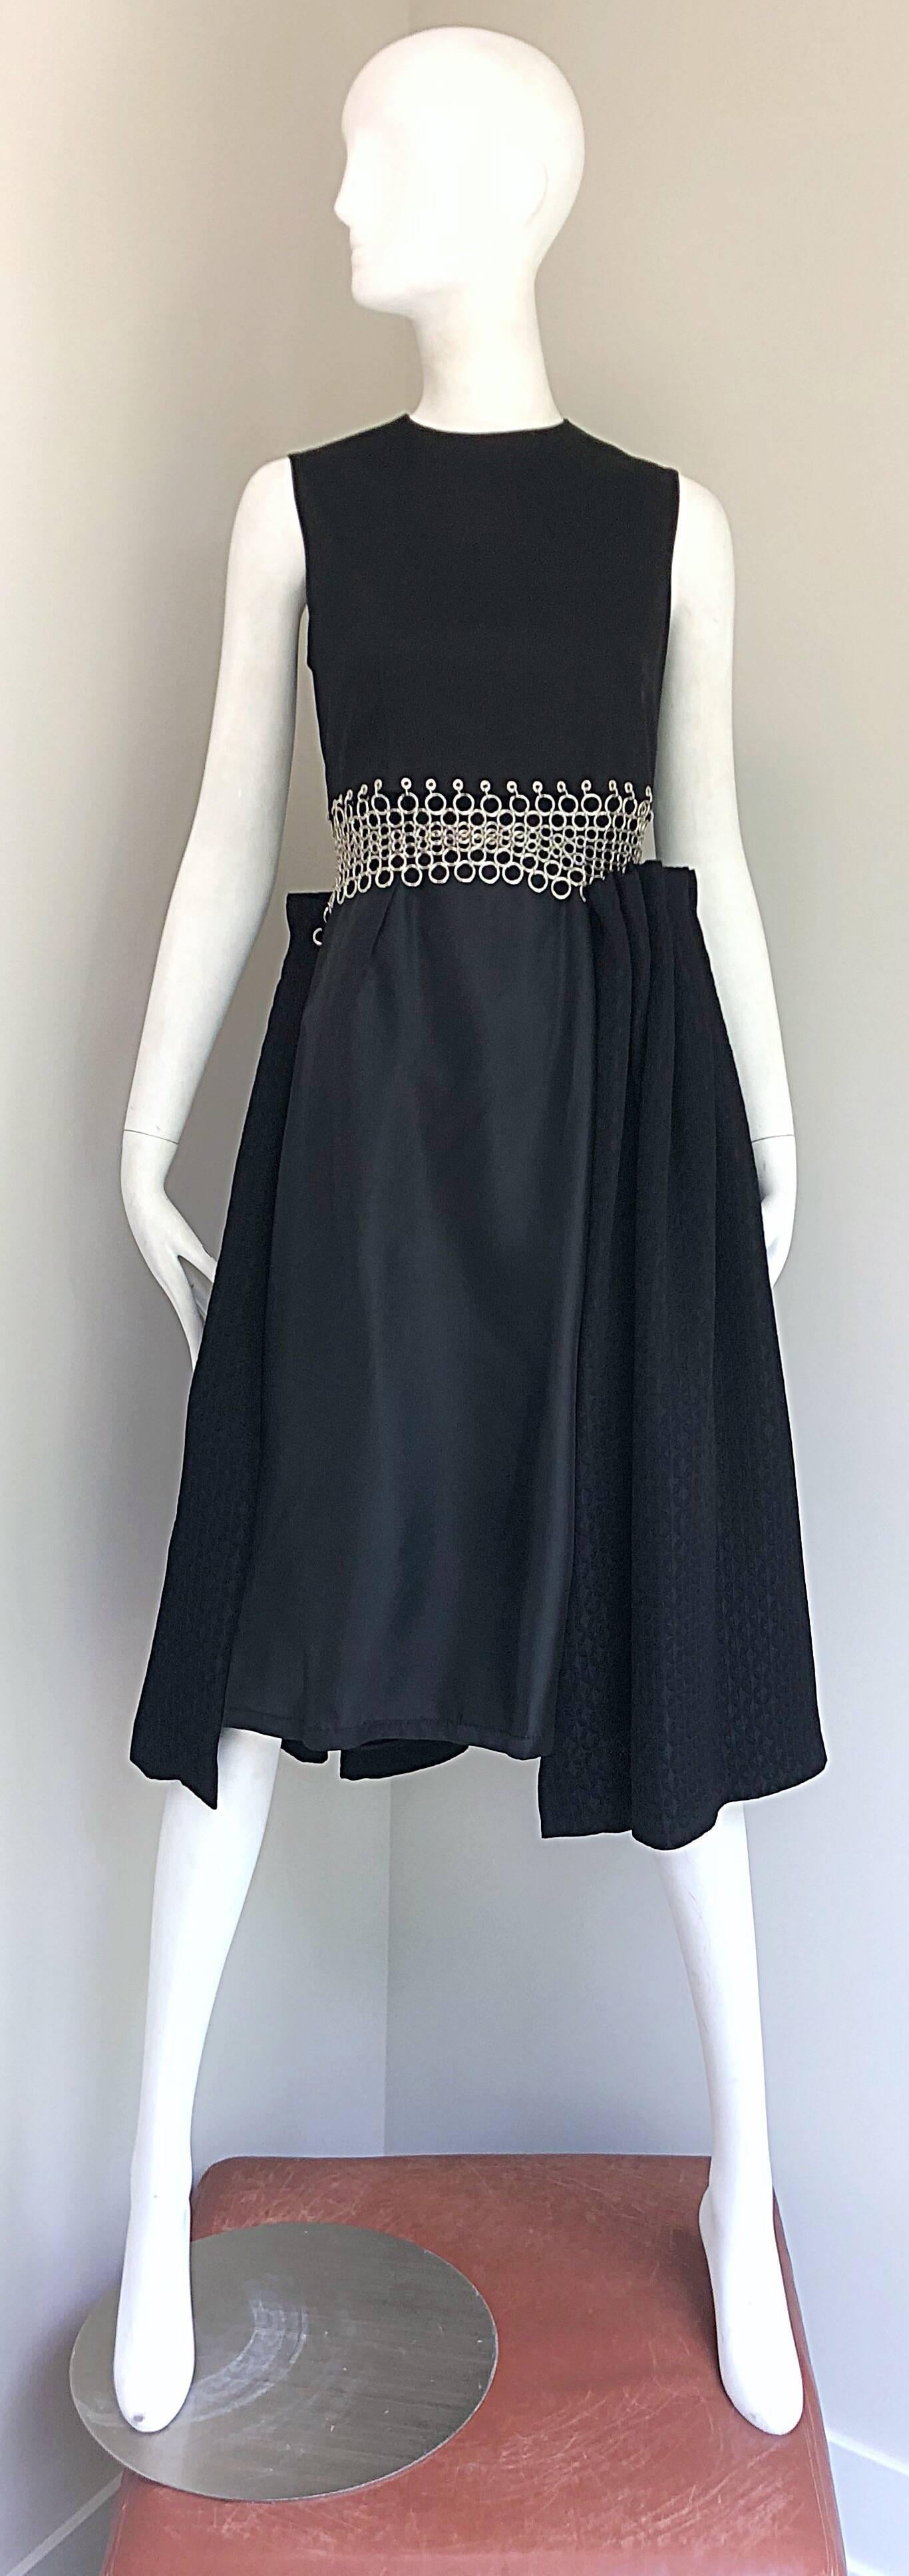 Rare Limited Edition brand new with tags COMME DES GARCONS NOIR KEI NINOMIYA black sleeveless Avant Garde cotton dress! Features a tailored bodice with an asymmetrical slight A-Line skirt. Hundreds of hand-sewn silver metal grommets adorn the front